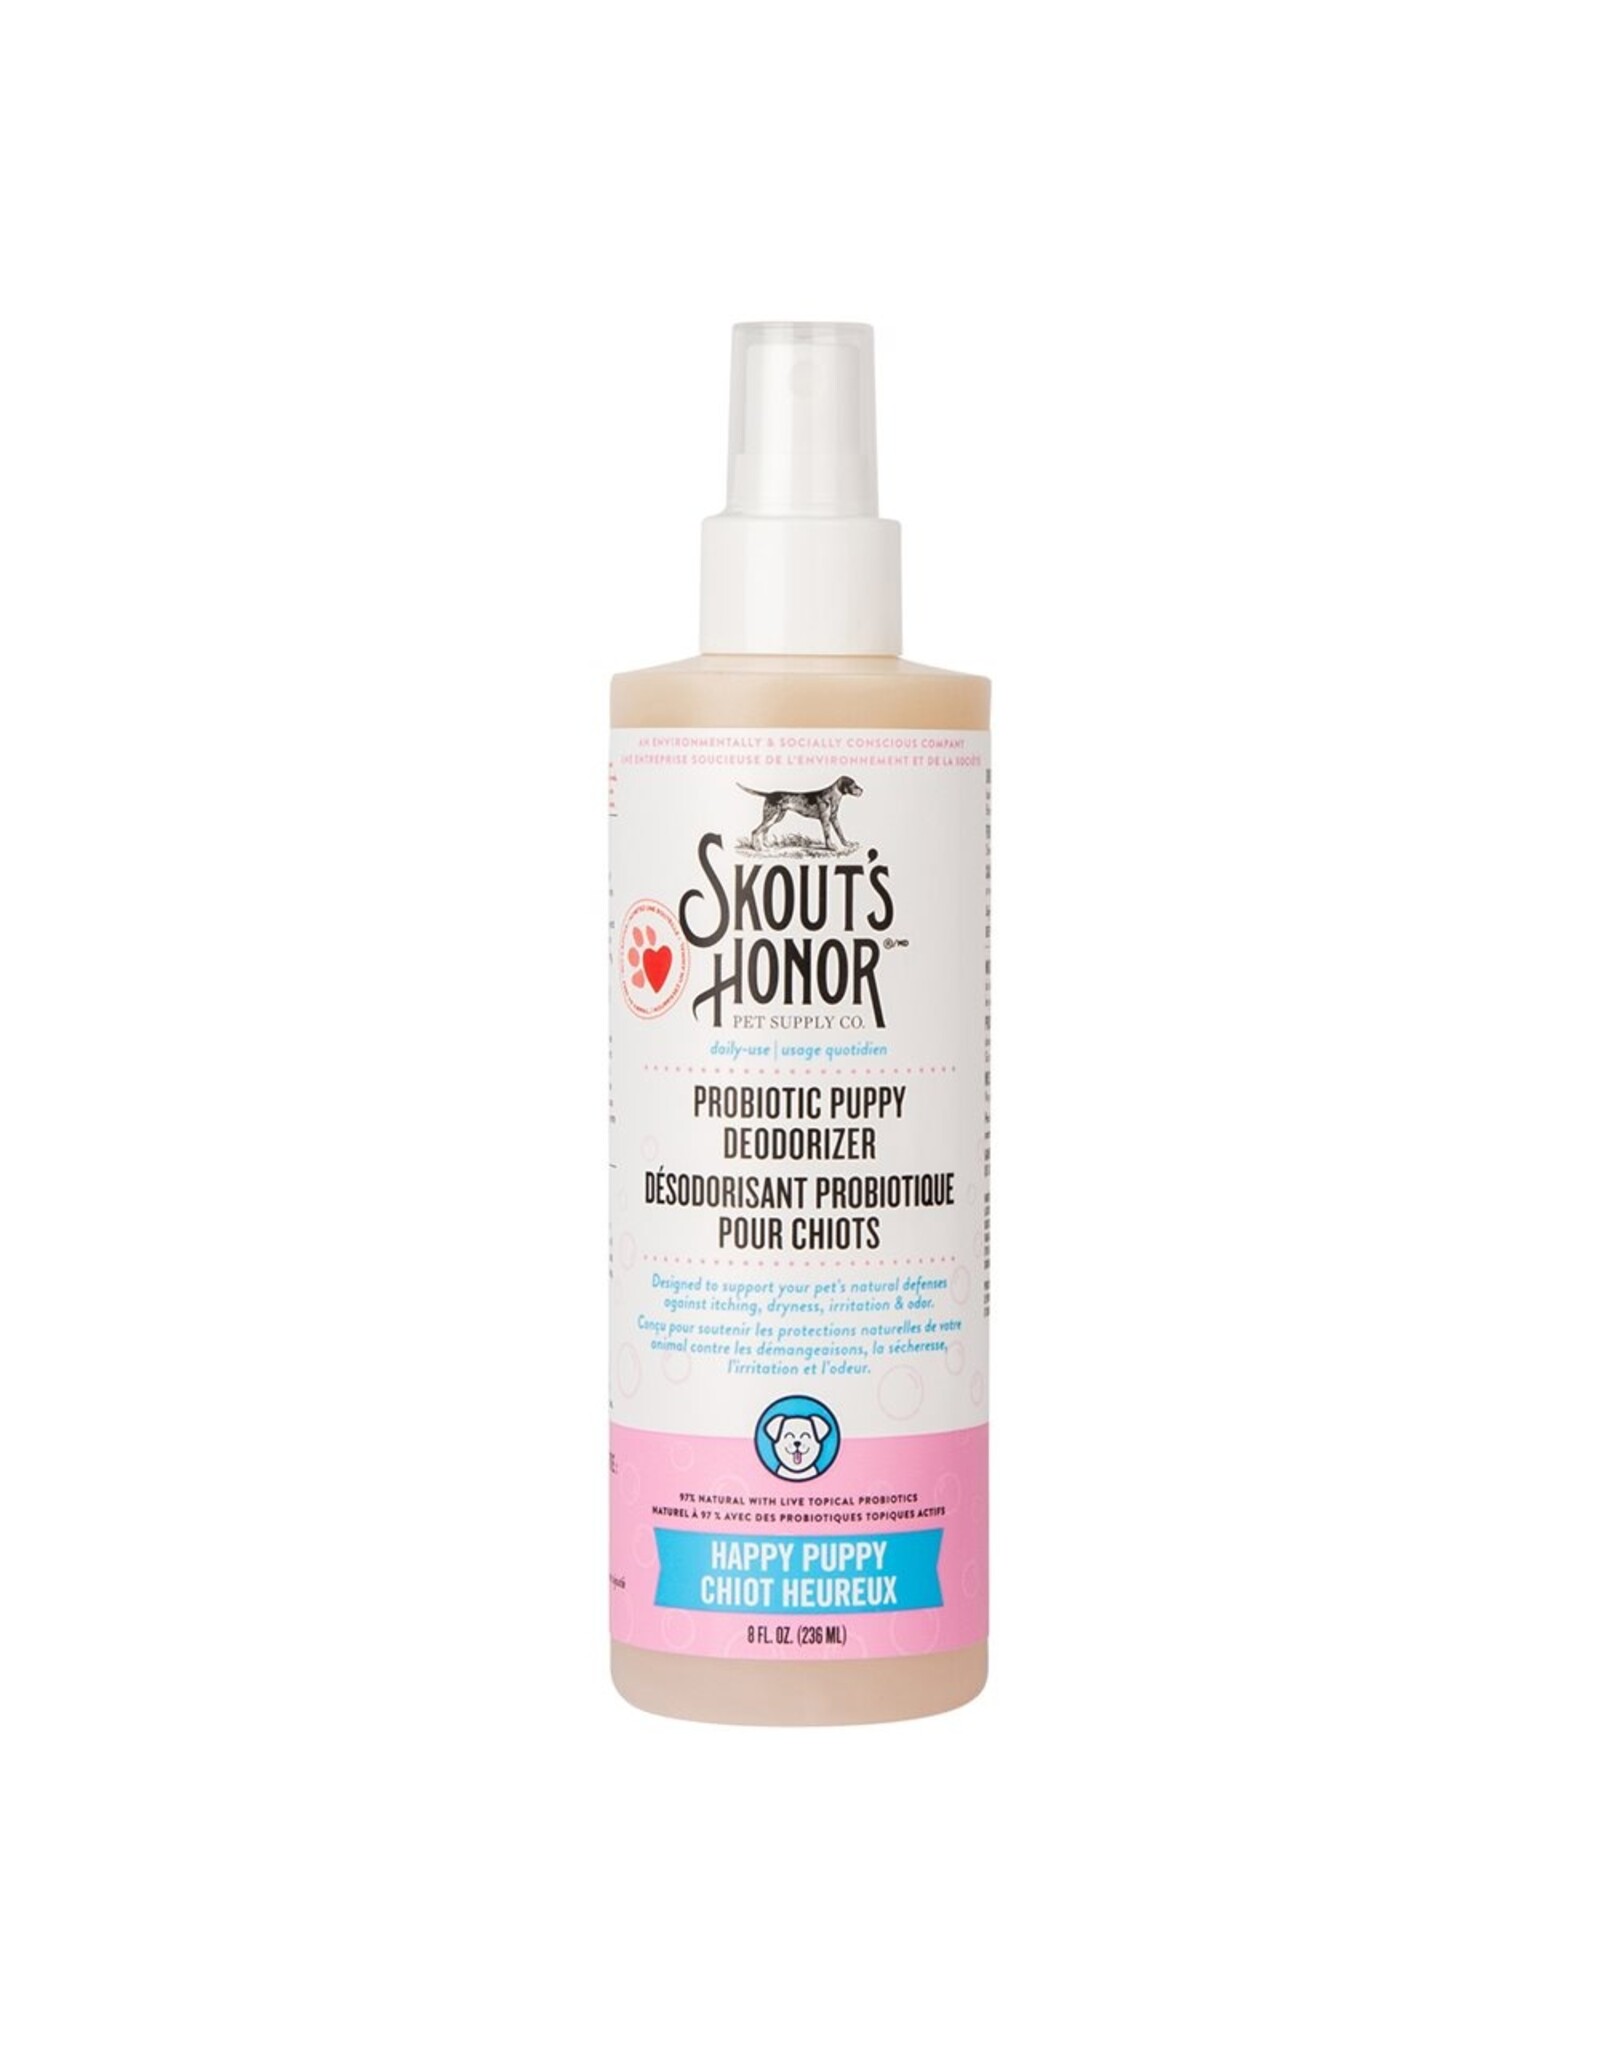 Skout's Honor Probiotic Daily Use Deodorizer - Happy Puppy